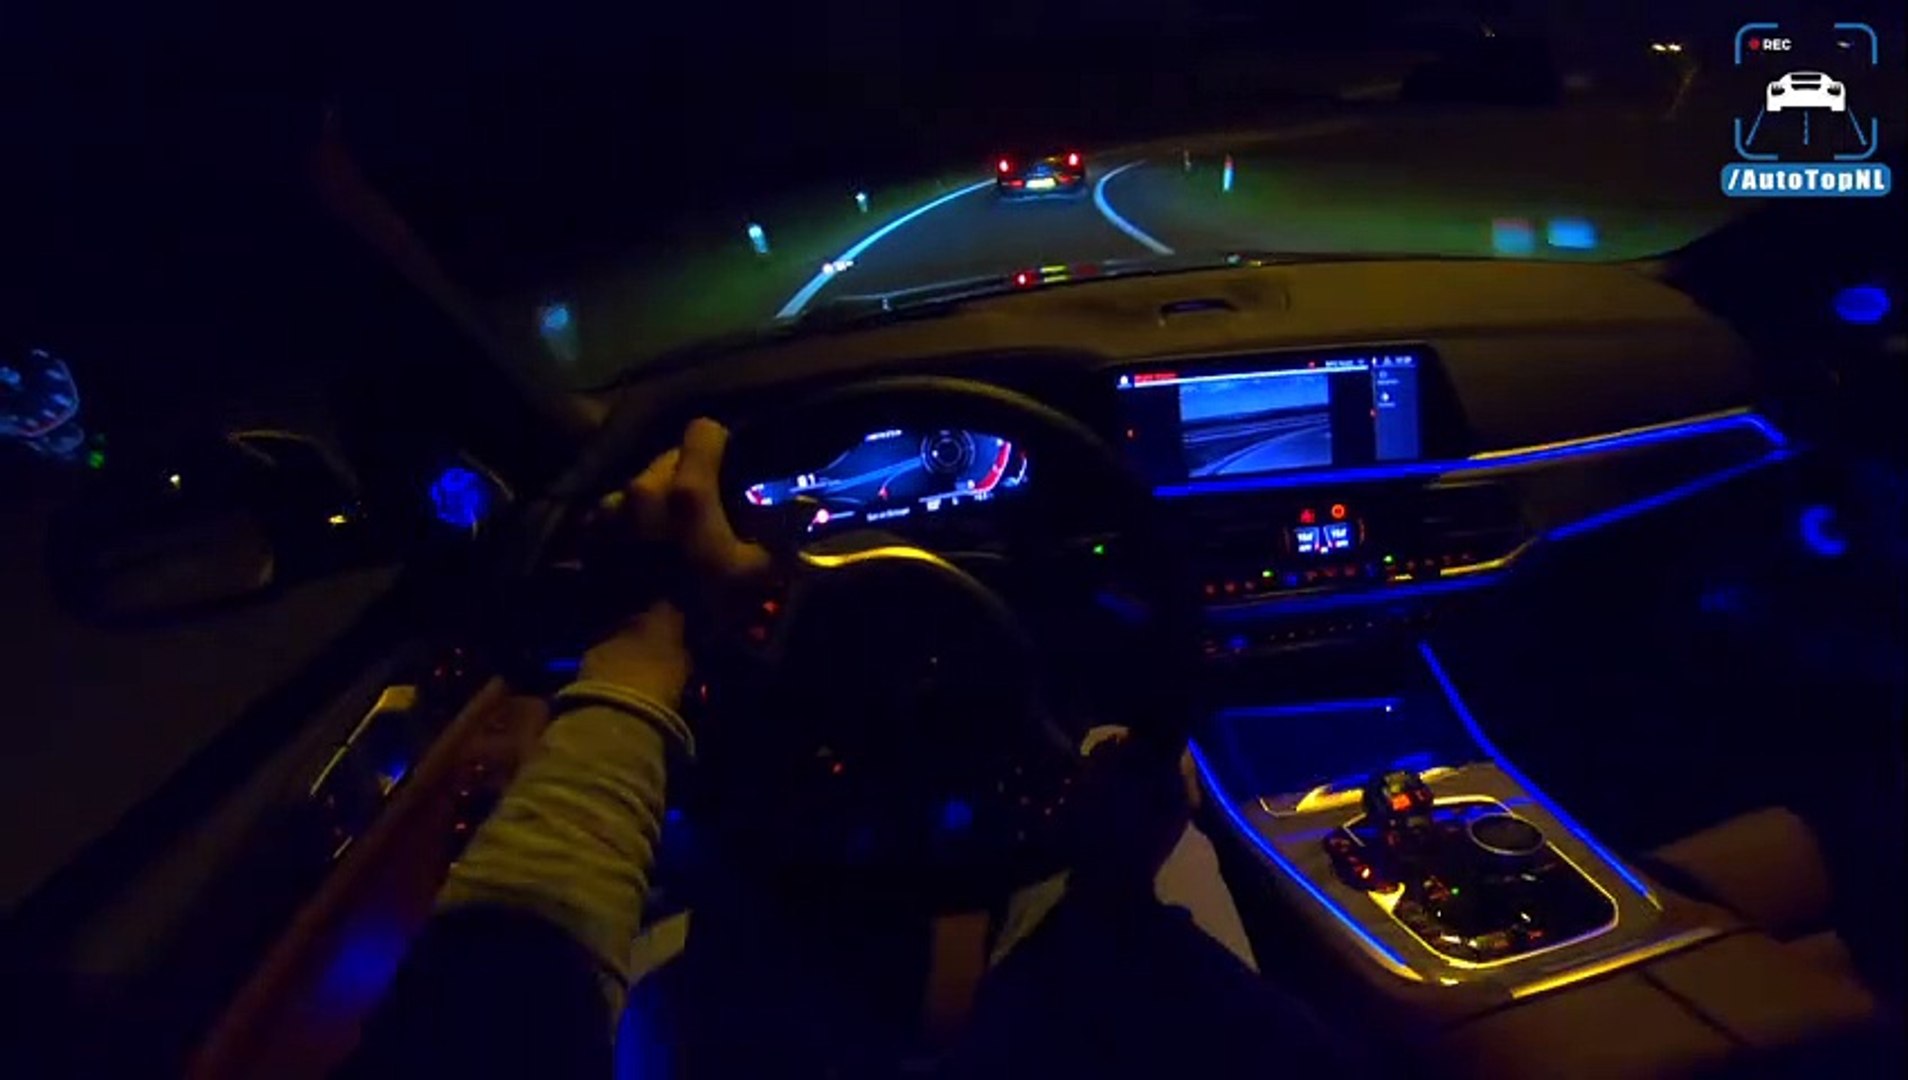 NEW! BMW X5 M50d G05 NIGHT DRIVE POV - AMBIENT LIGHTING by AutoTopNL